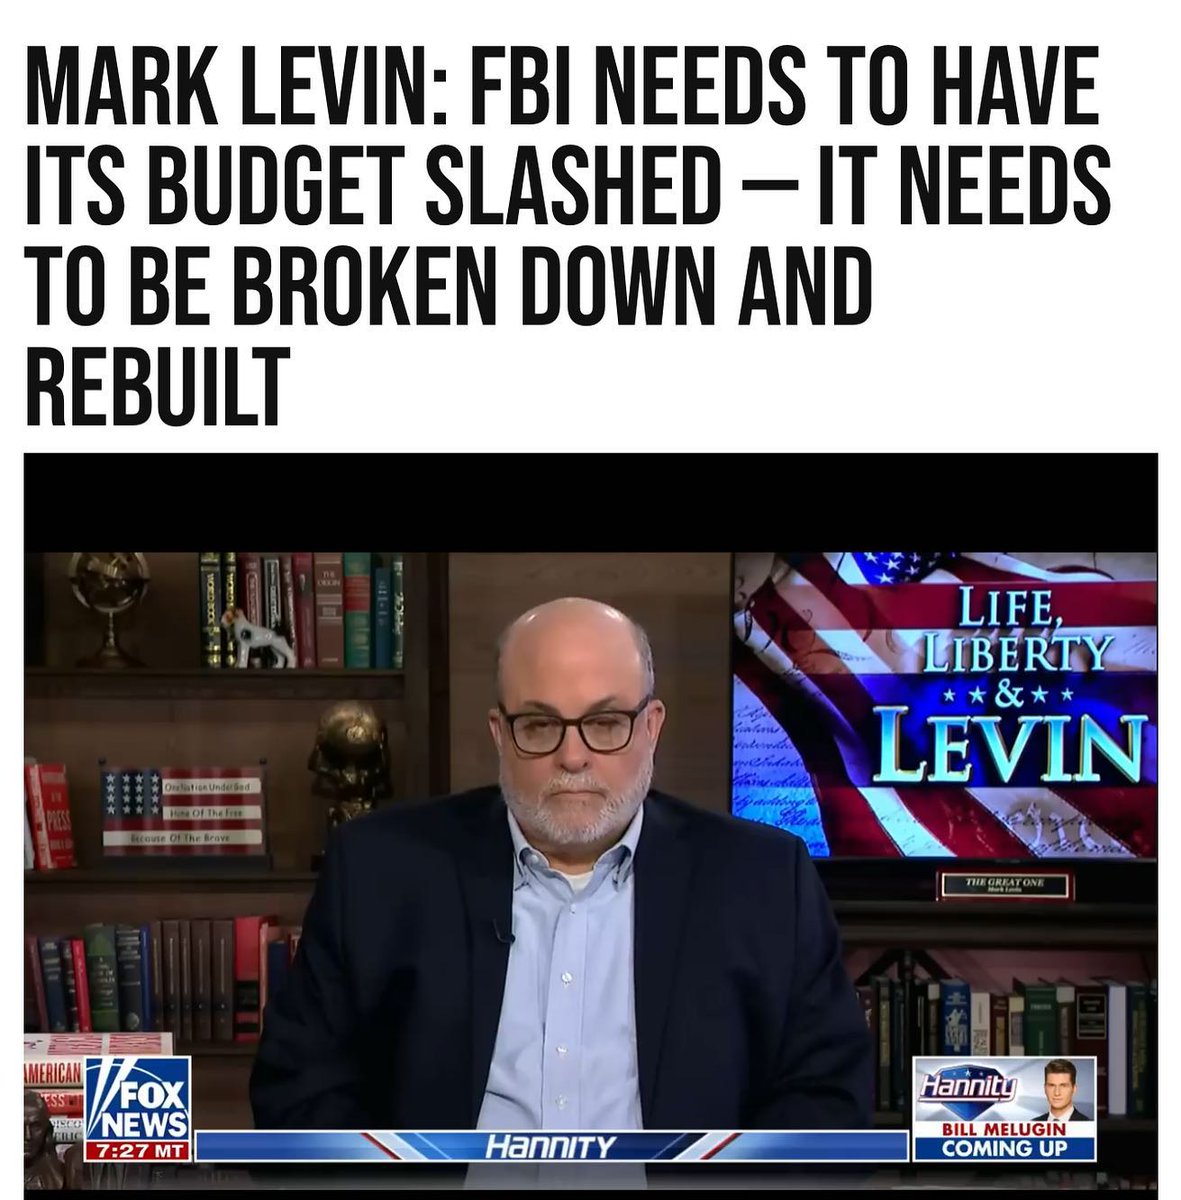 Monday on FNC’s “Hannity,” @seanhannity conservative talker and host of “Life, Liberty & Levin” Mark Levin @marklevinshow reacted to the findings of the Durham report released earlier in the day, which was critical of the FBI’s handling of its investigation into alleged Trump…